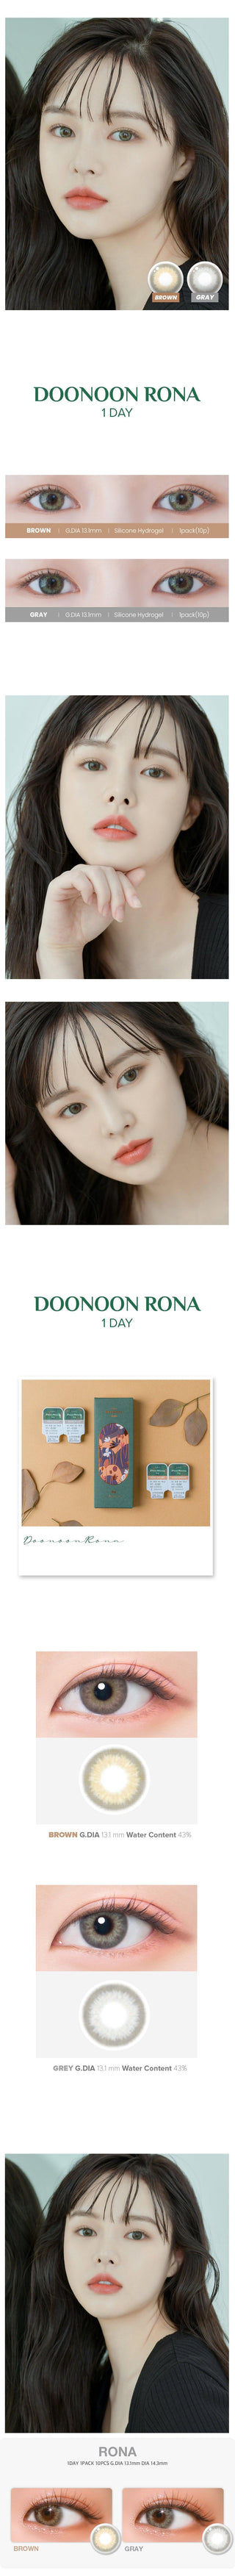 Variety of DooNoon Rona 1-Day Grey (10pk) contact lens colors displayed, with closeups of an eye wearing the contact lens colors, and with a model wearing the contact lens colors showing realistic eye-enlarging effect from various angles.